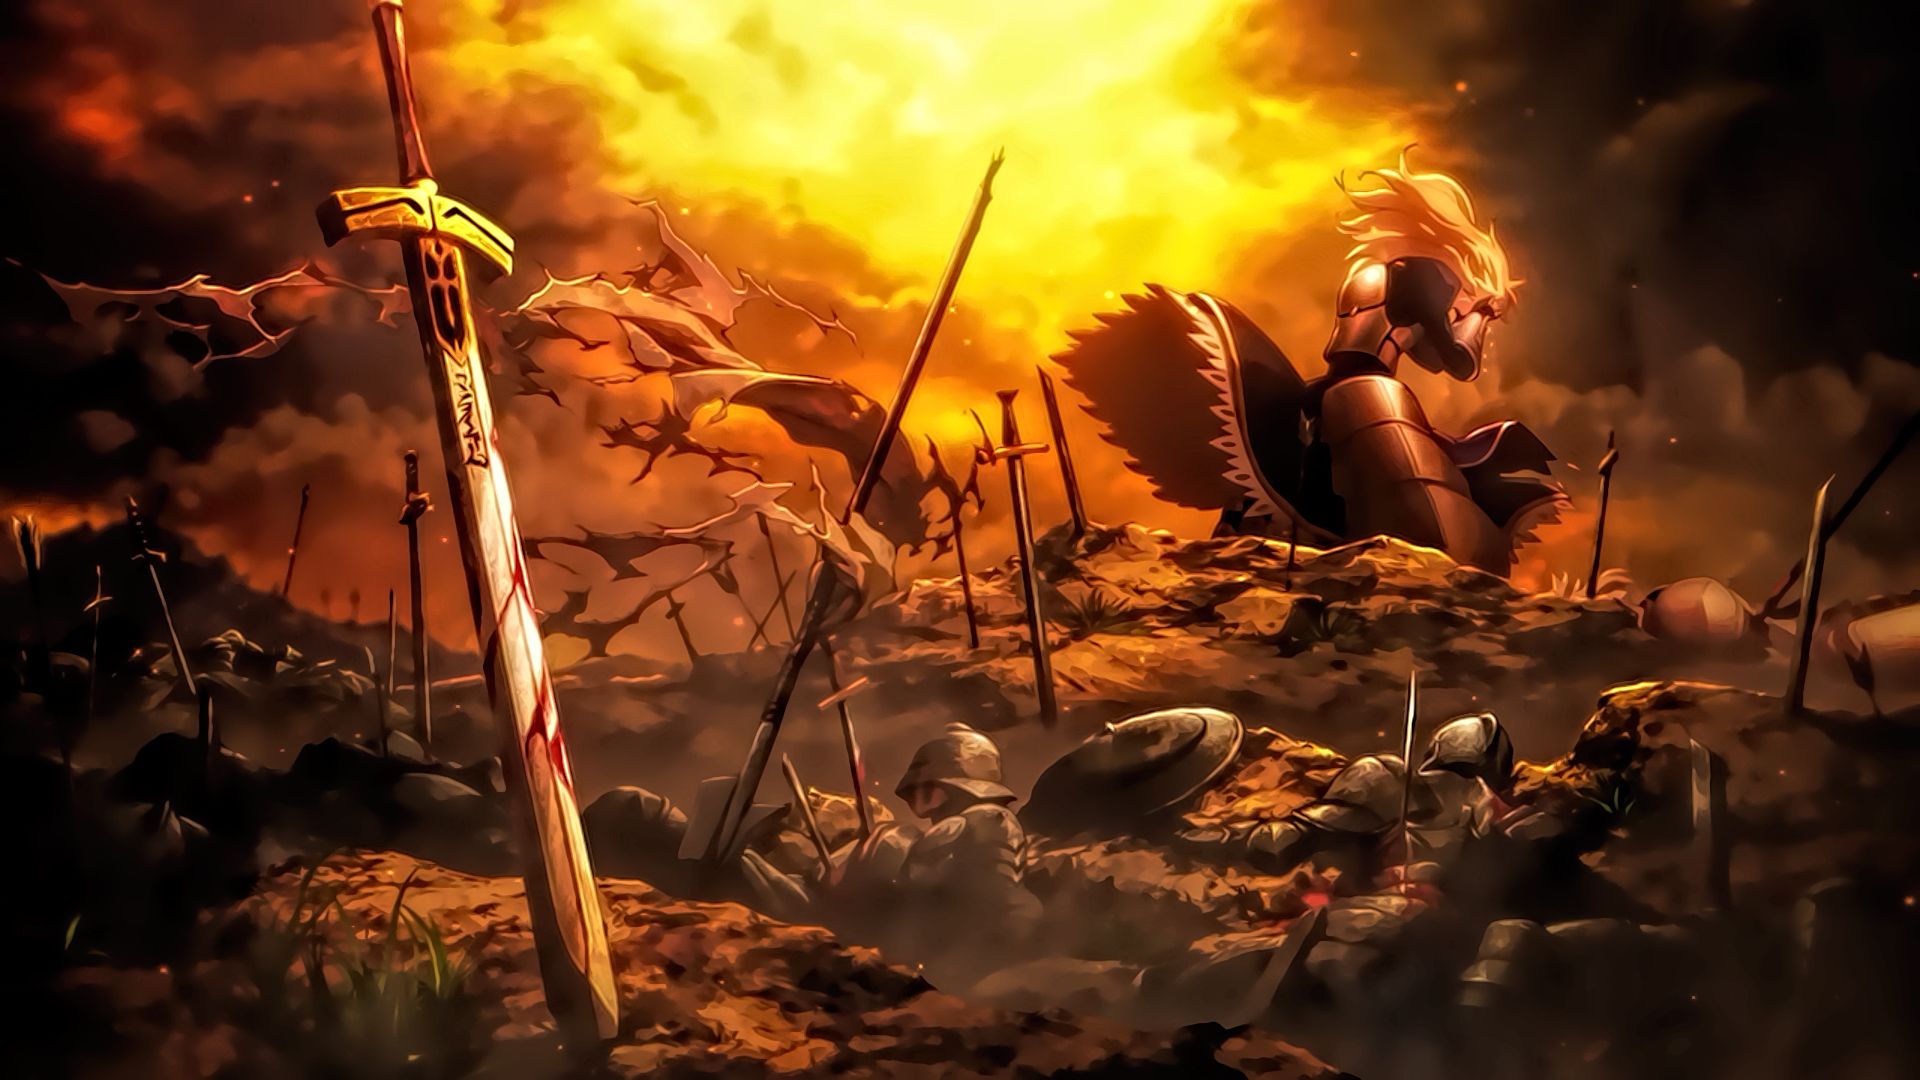 fate series, death, fate/stay night: unlimited blade works, anime, blonde, excalibur, saber (fate series), sword HD wallpaper